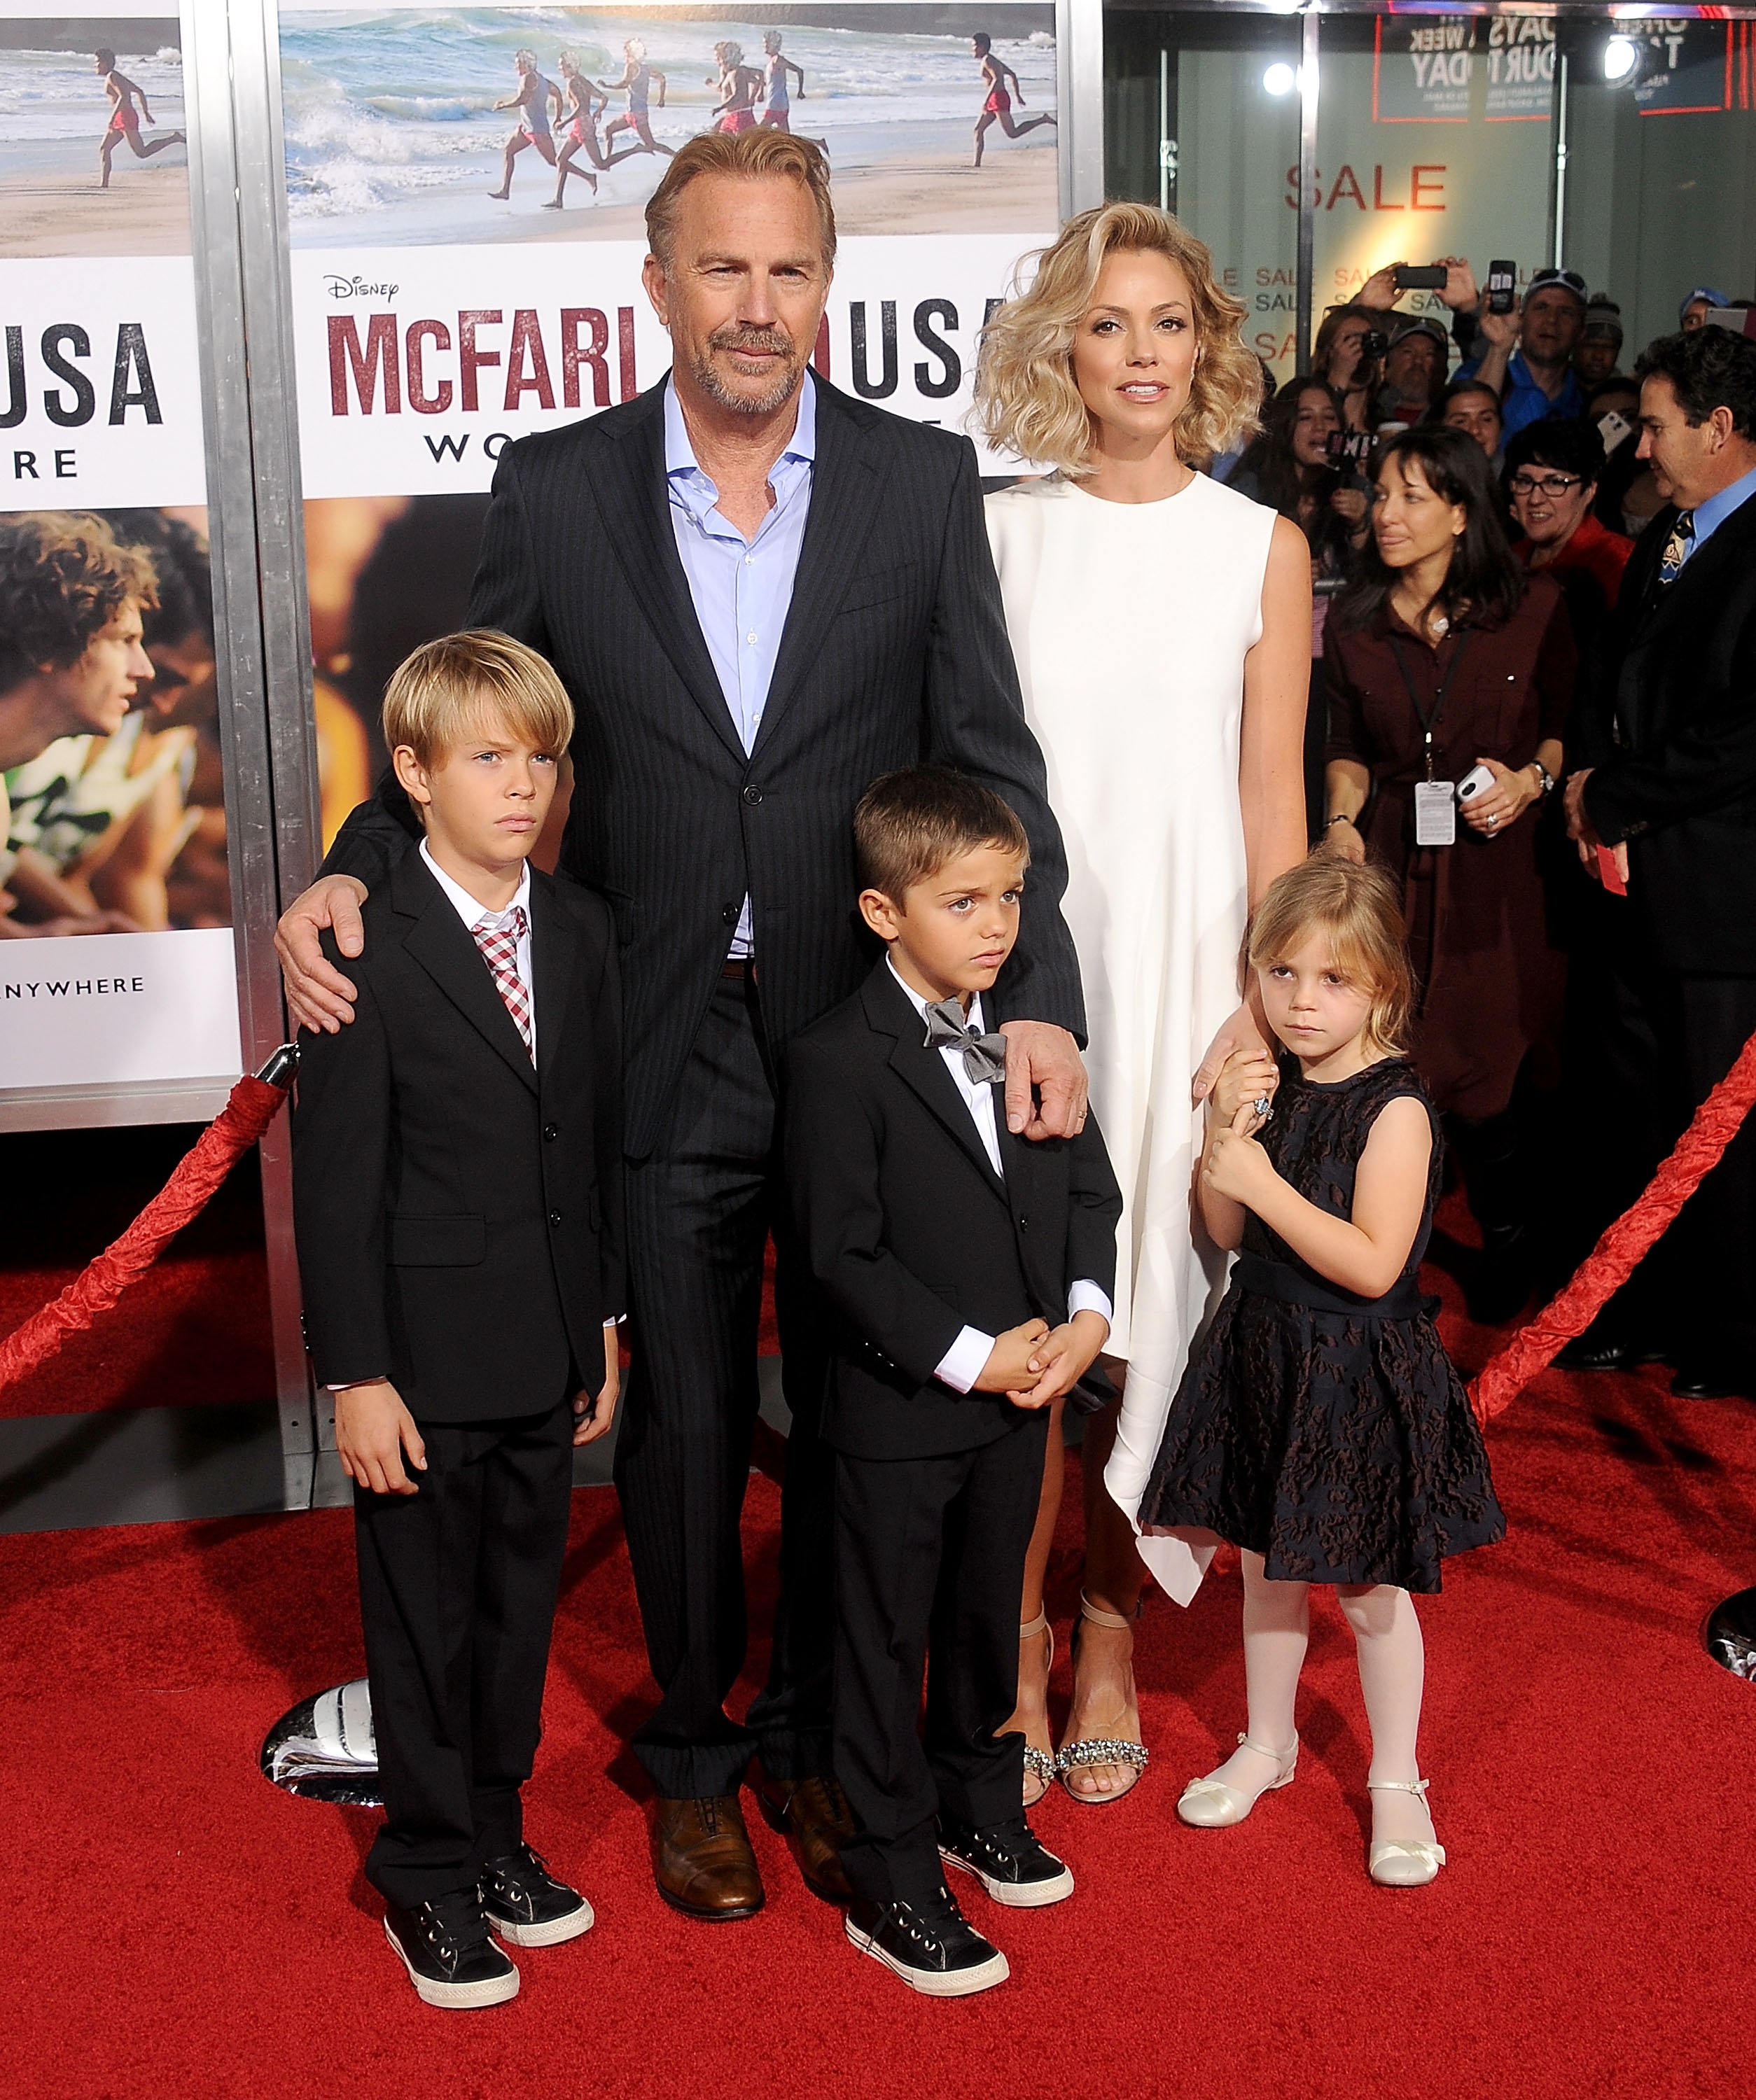 Cayden Costner and his family at the World Premiere of Disney's "McFarland, USA" in California on February 9, 2015 | Source: Getty Images